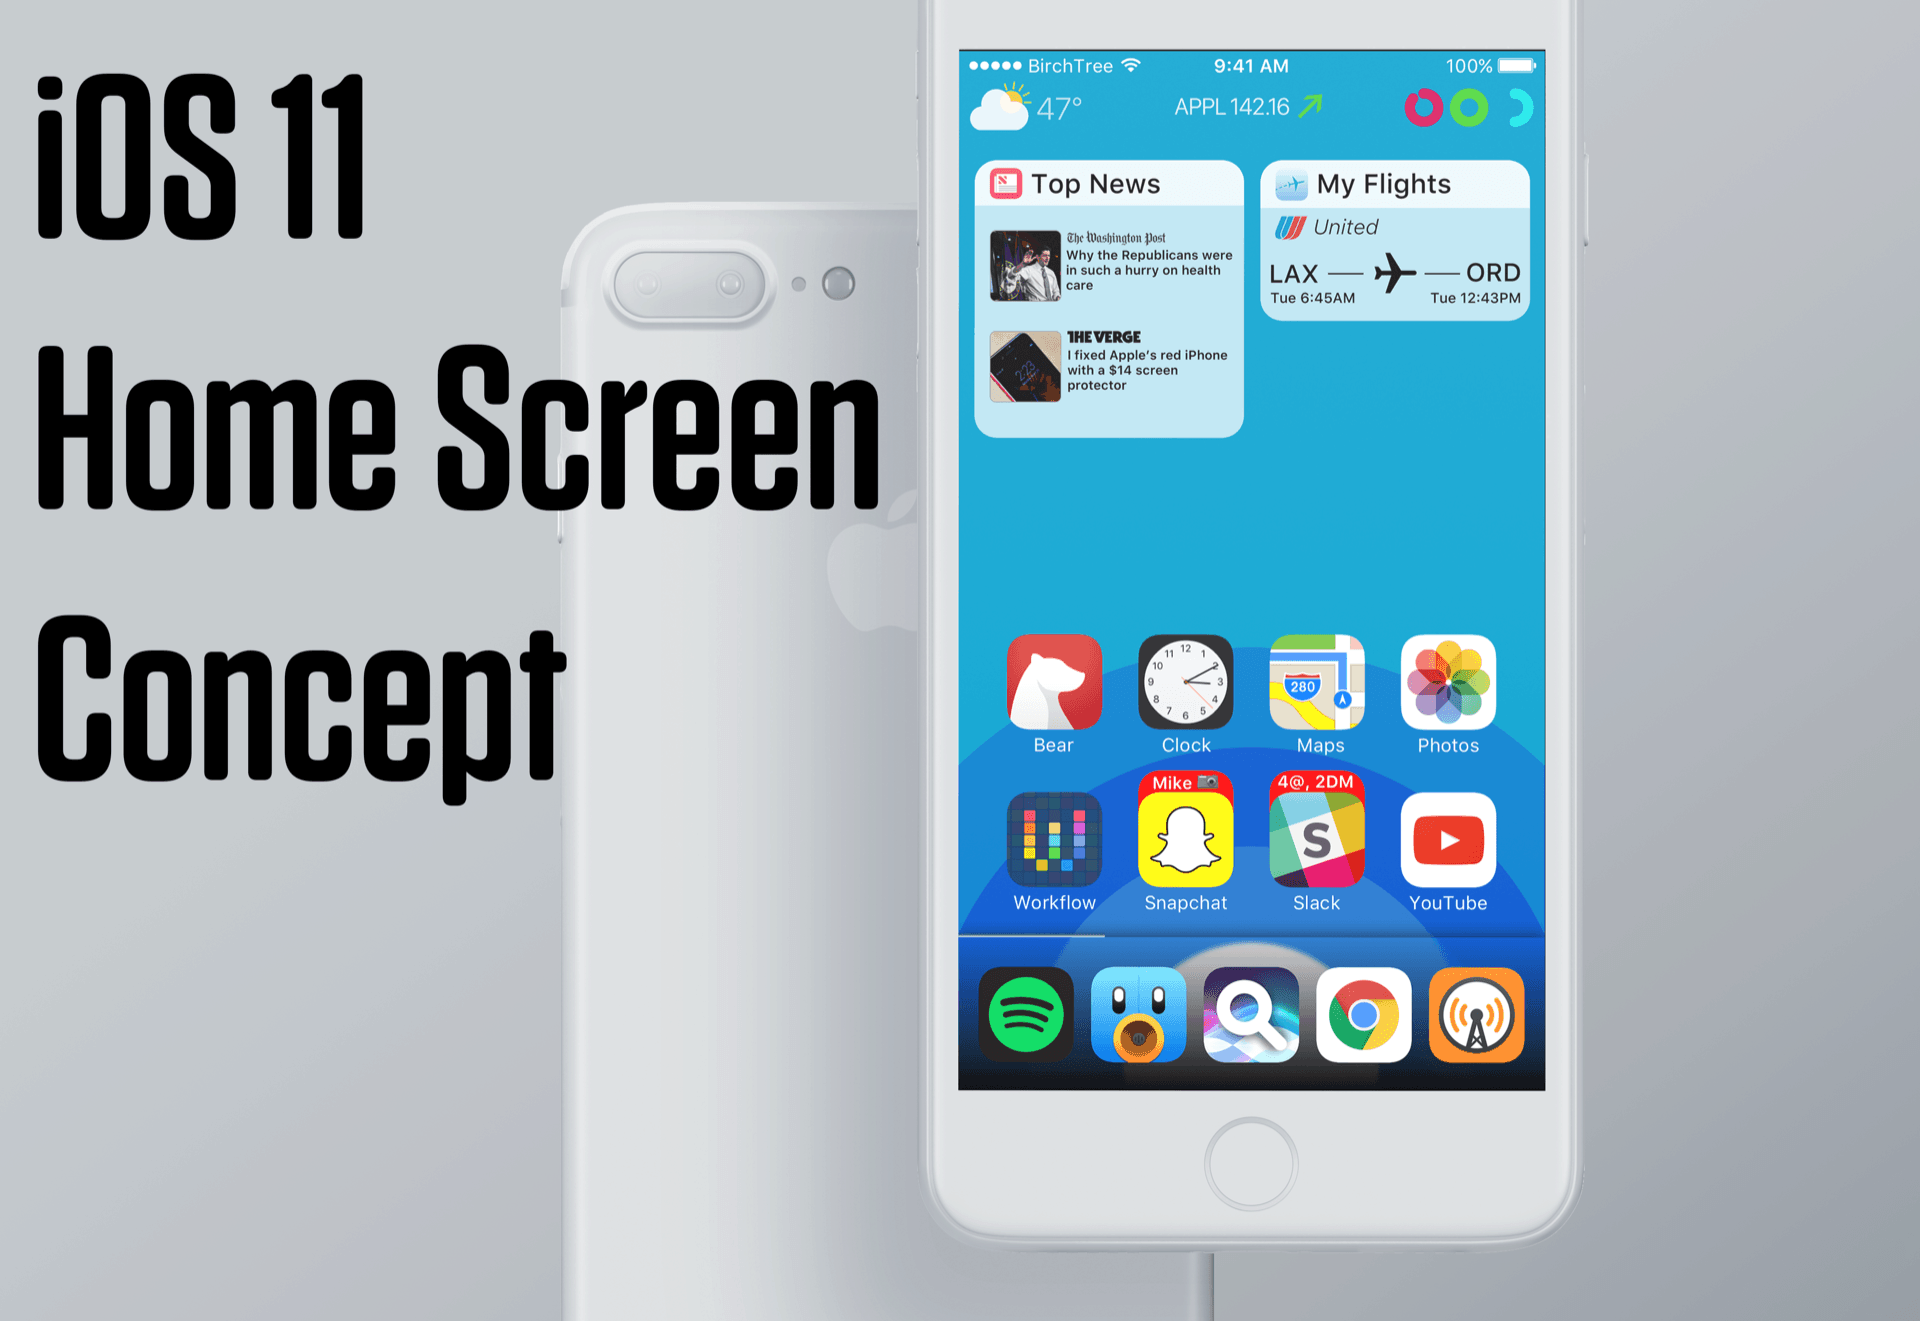 The Home screen becomes more than just an app launcher.